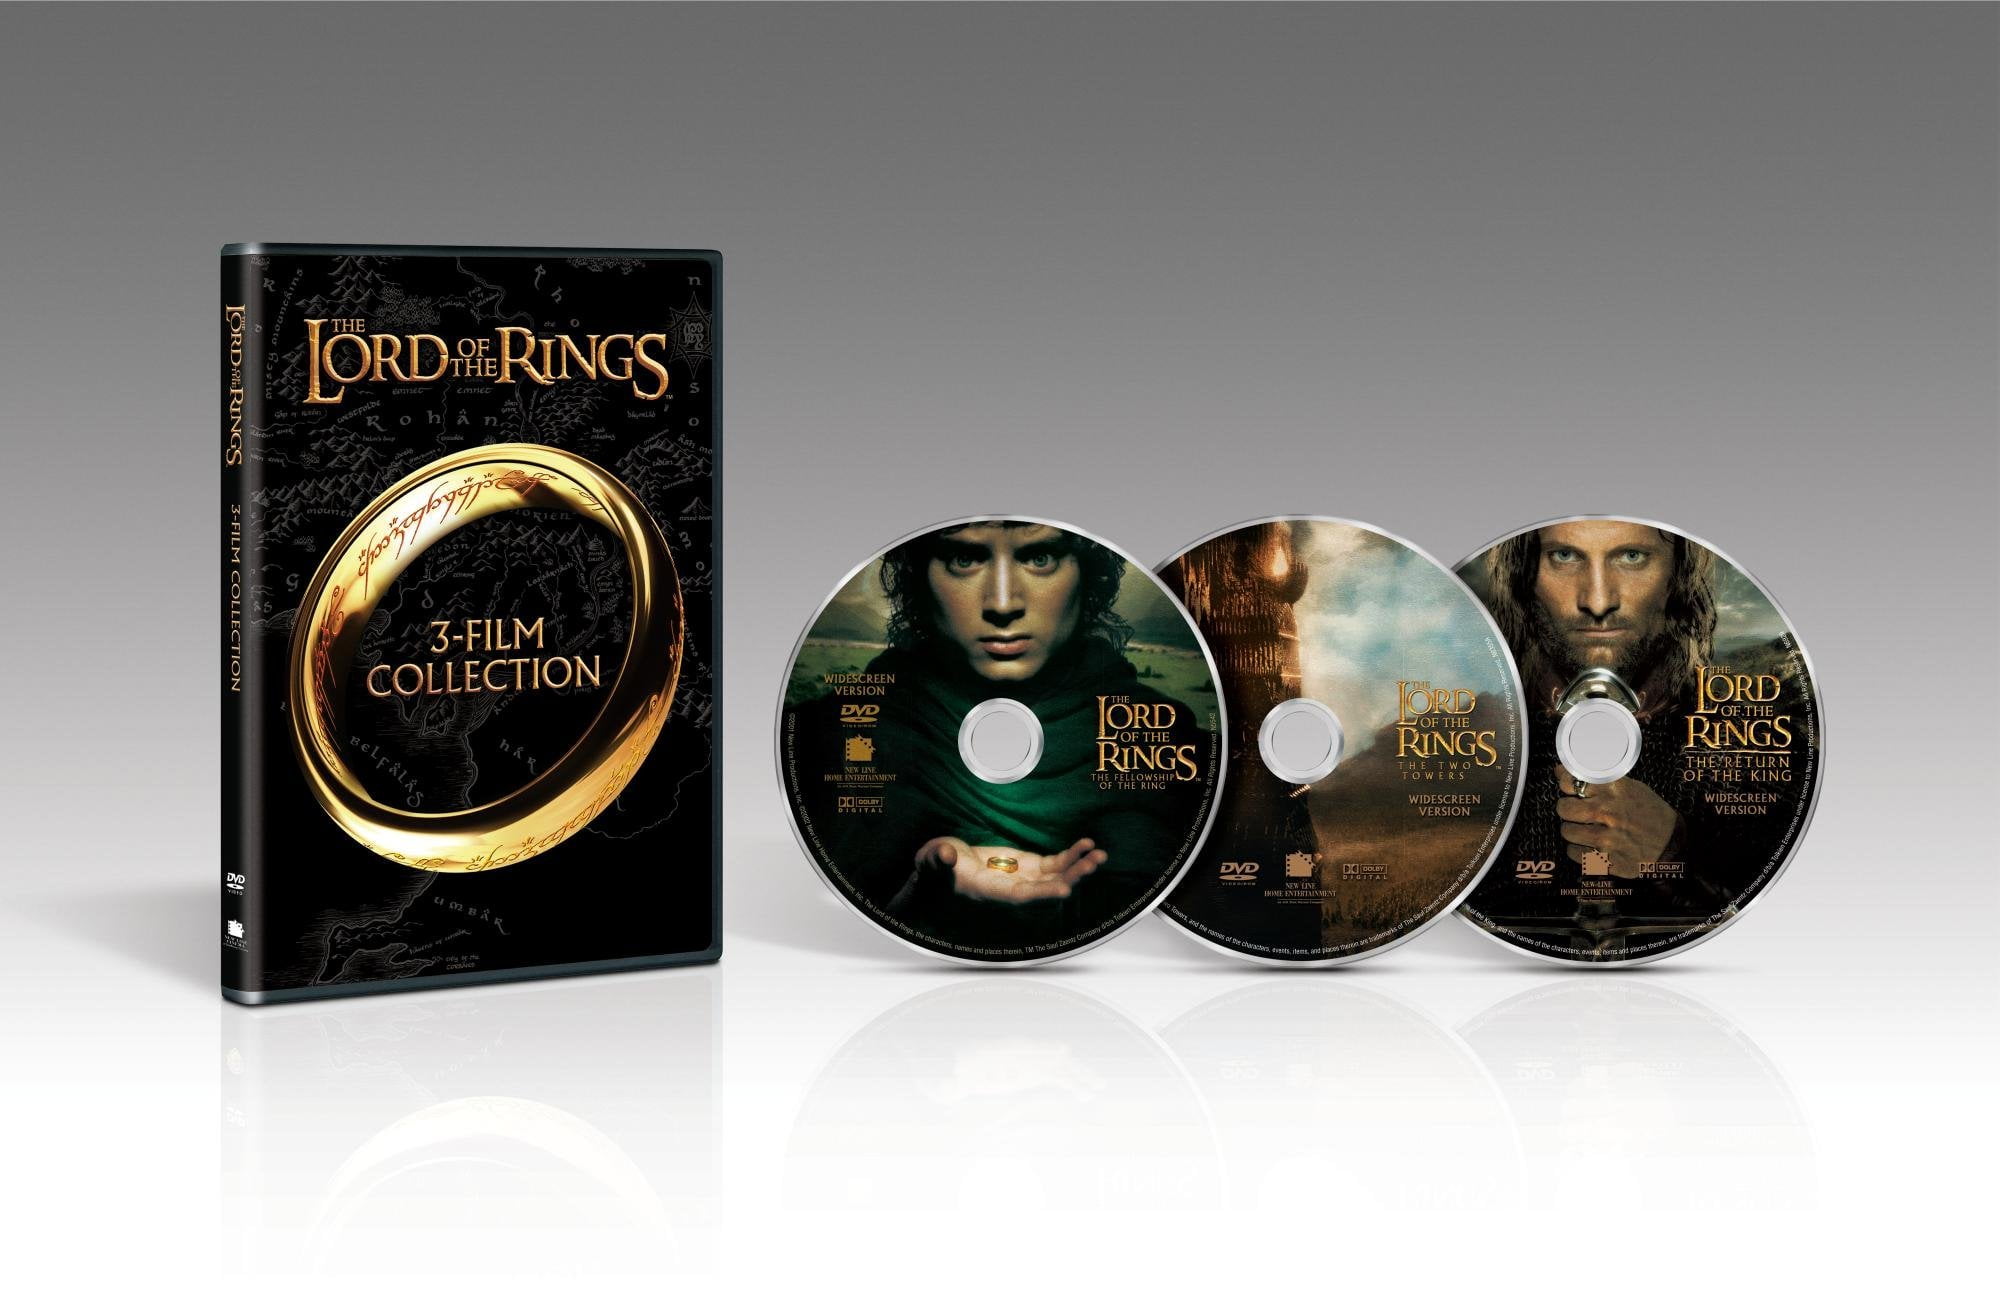 Regal - All 3 Lord of the Rings (extended editions) are